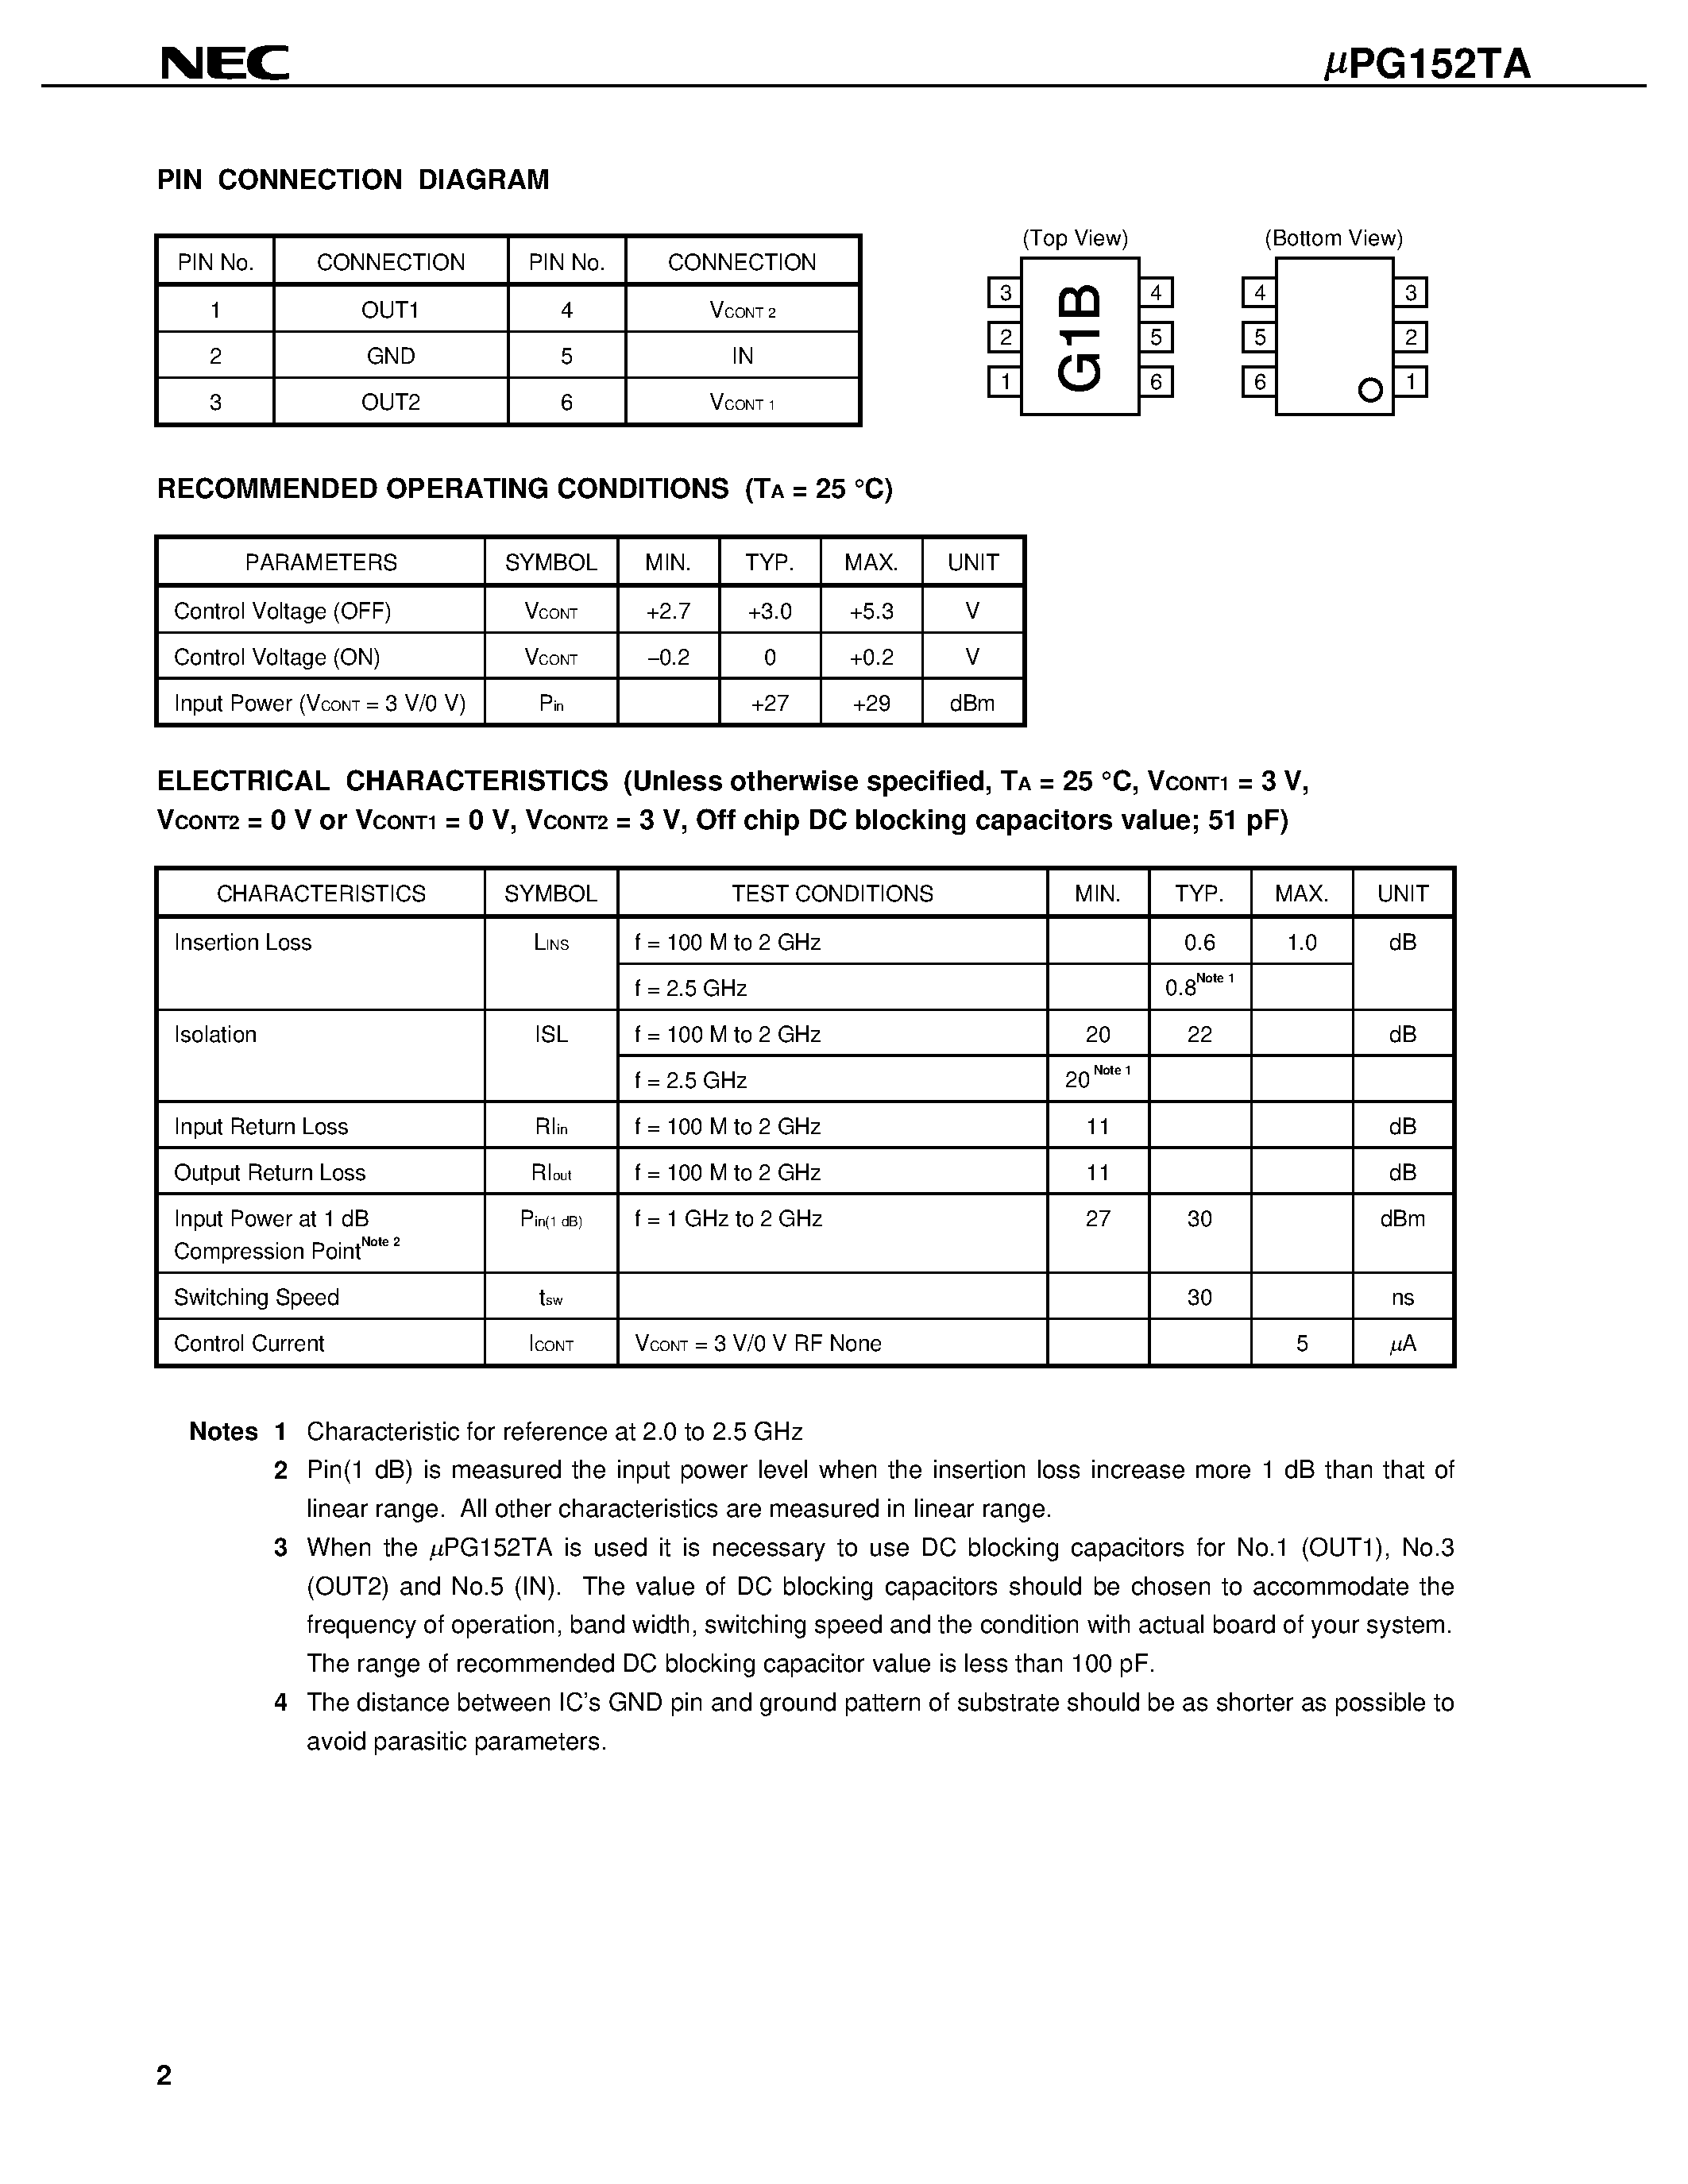 Datasheet UPG152TA - L-BAND SPDT SWITCH page 2